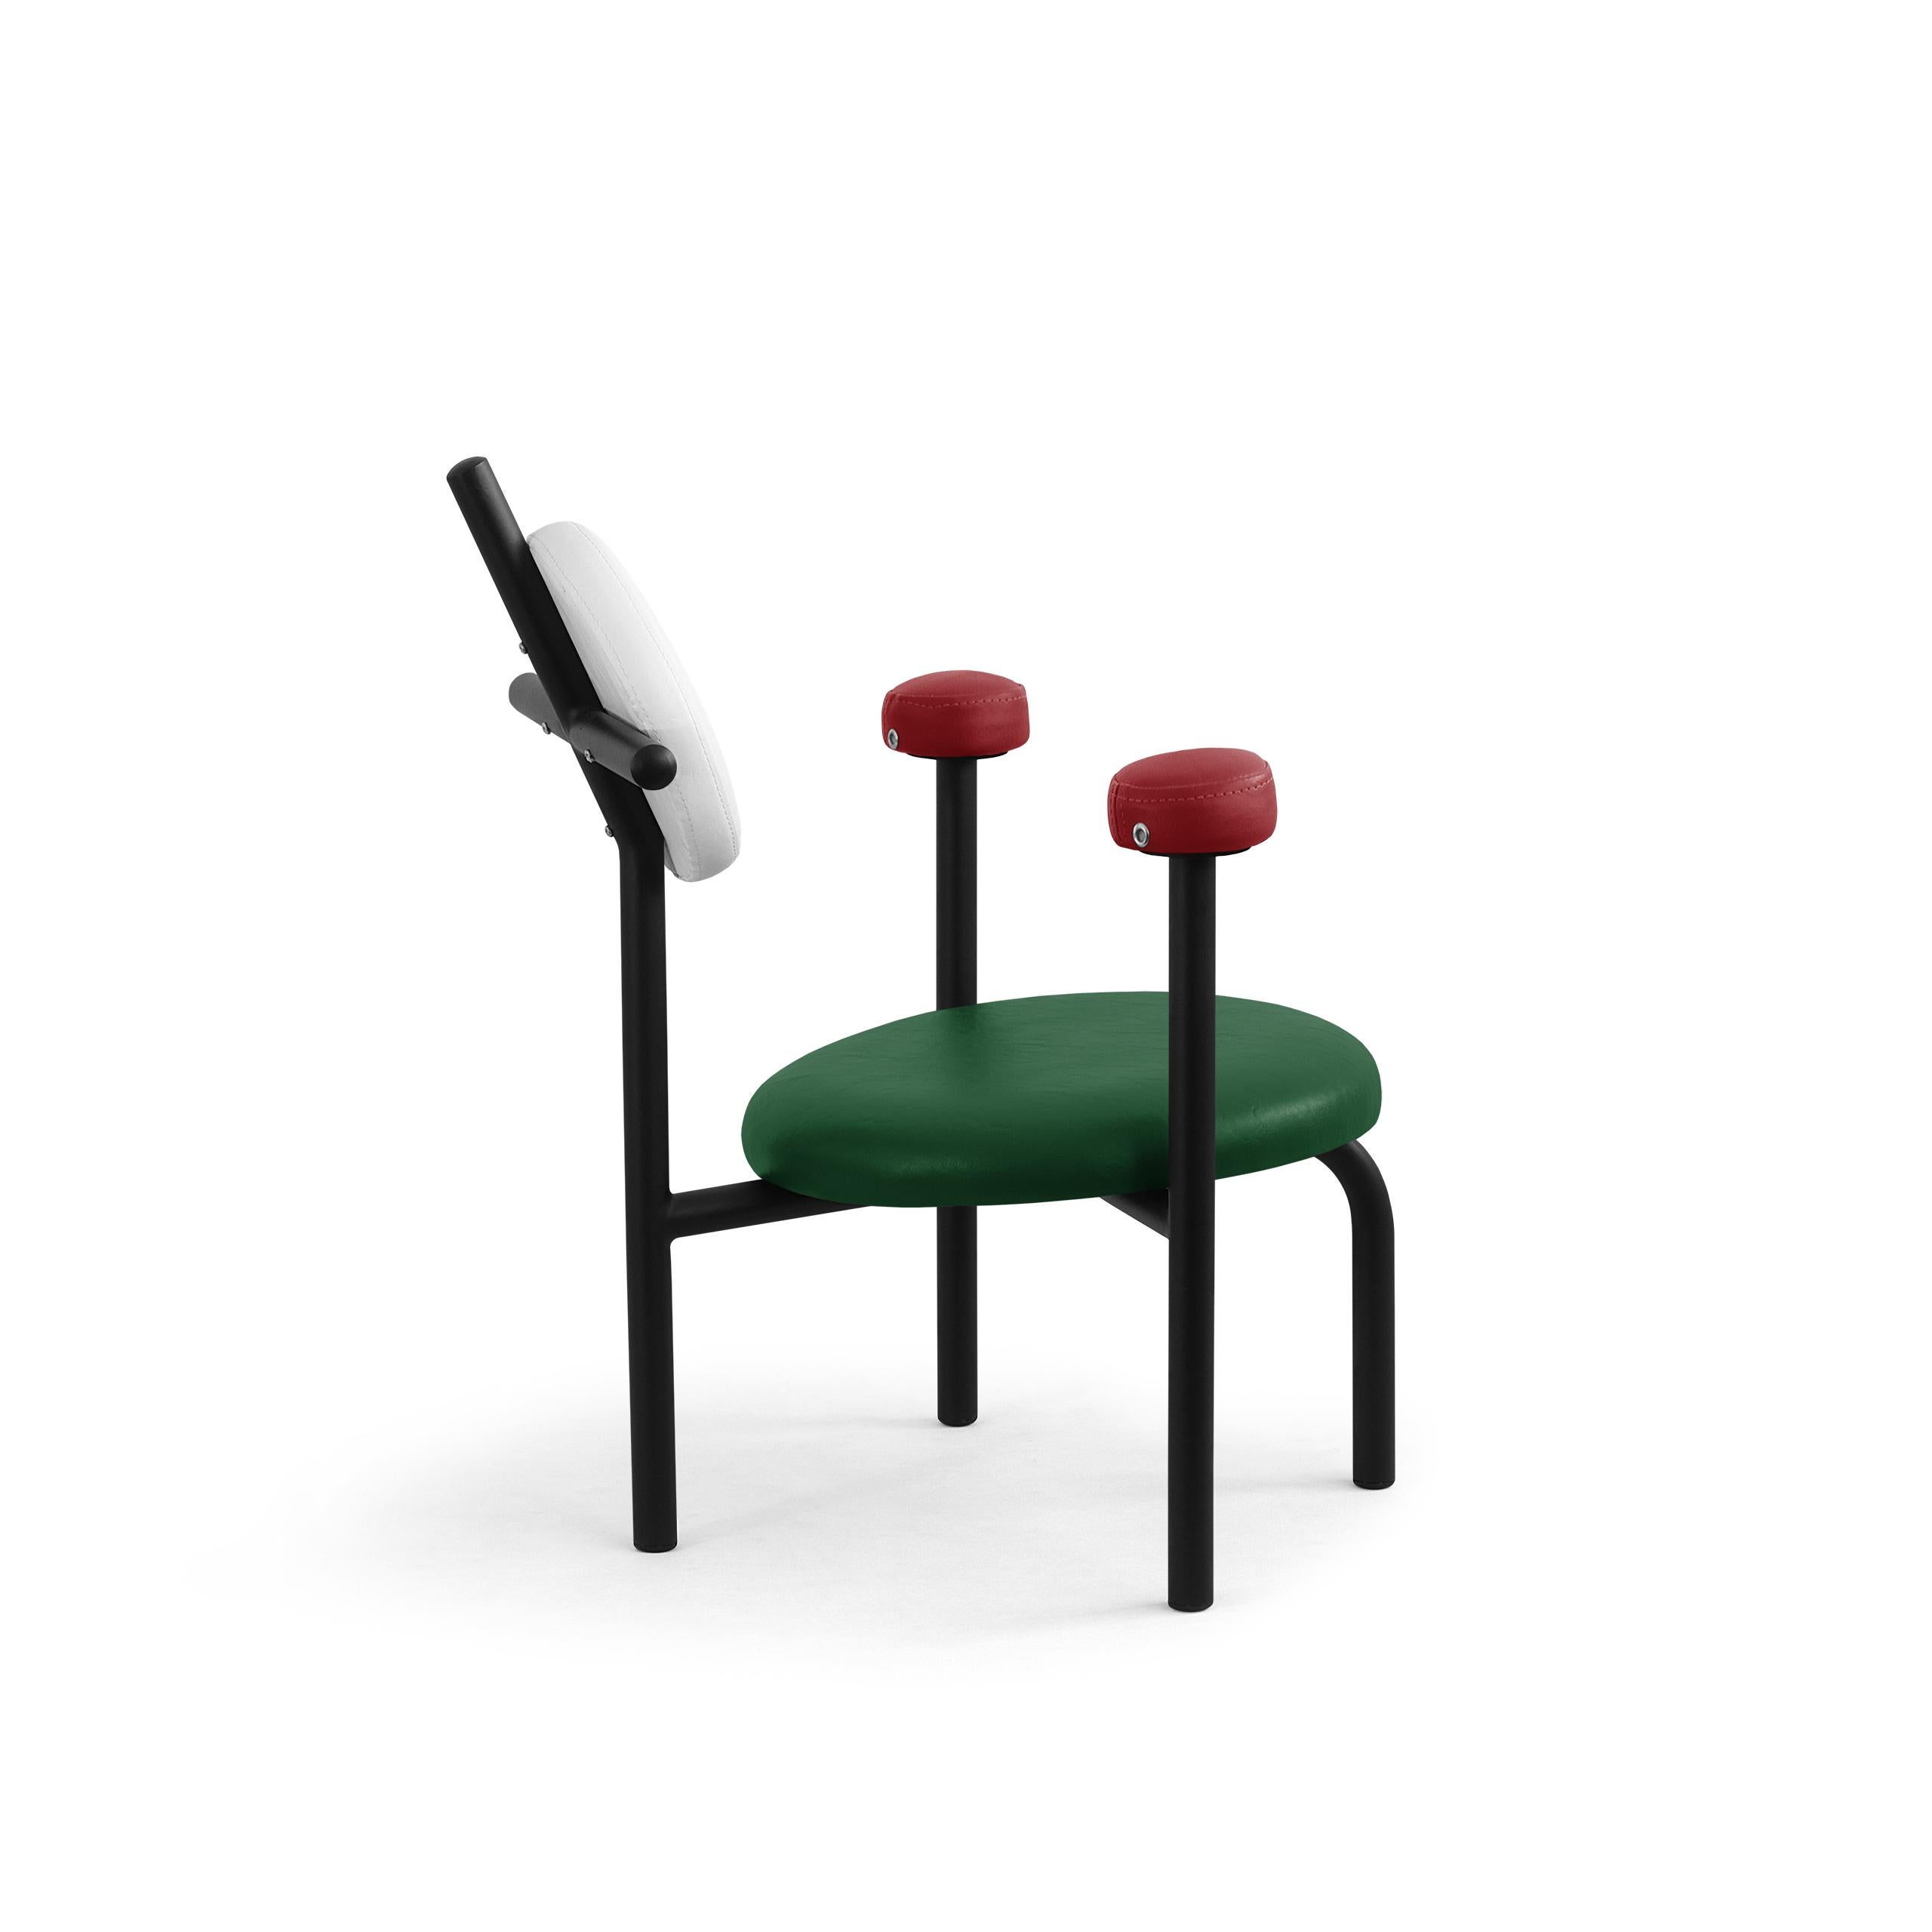 PK18 Impermeable Armchair, Green Seat & Black Metal Structure by Paulo Kobylka In New Condition For Sale In Londrina, Paraná